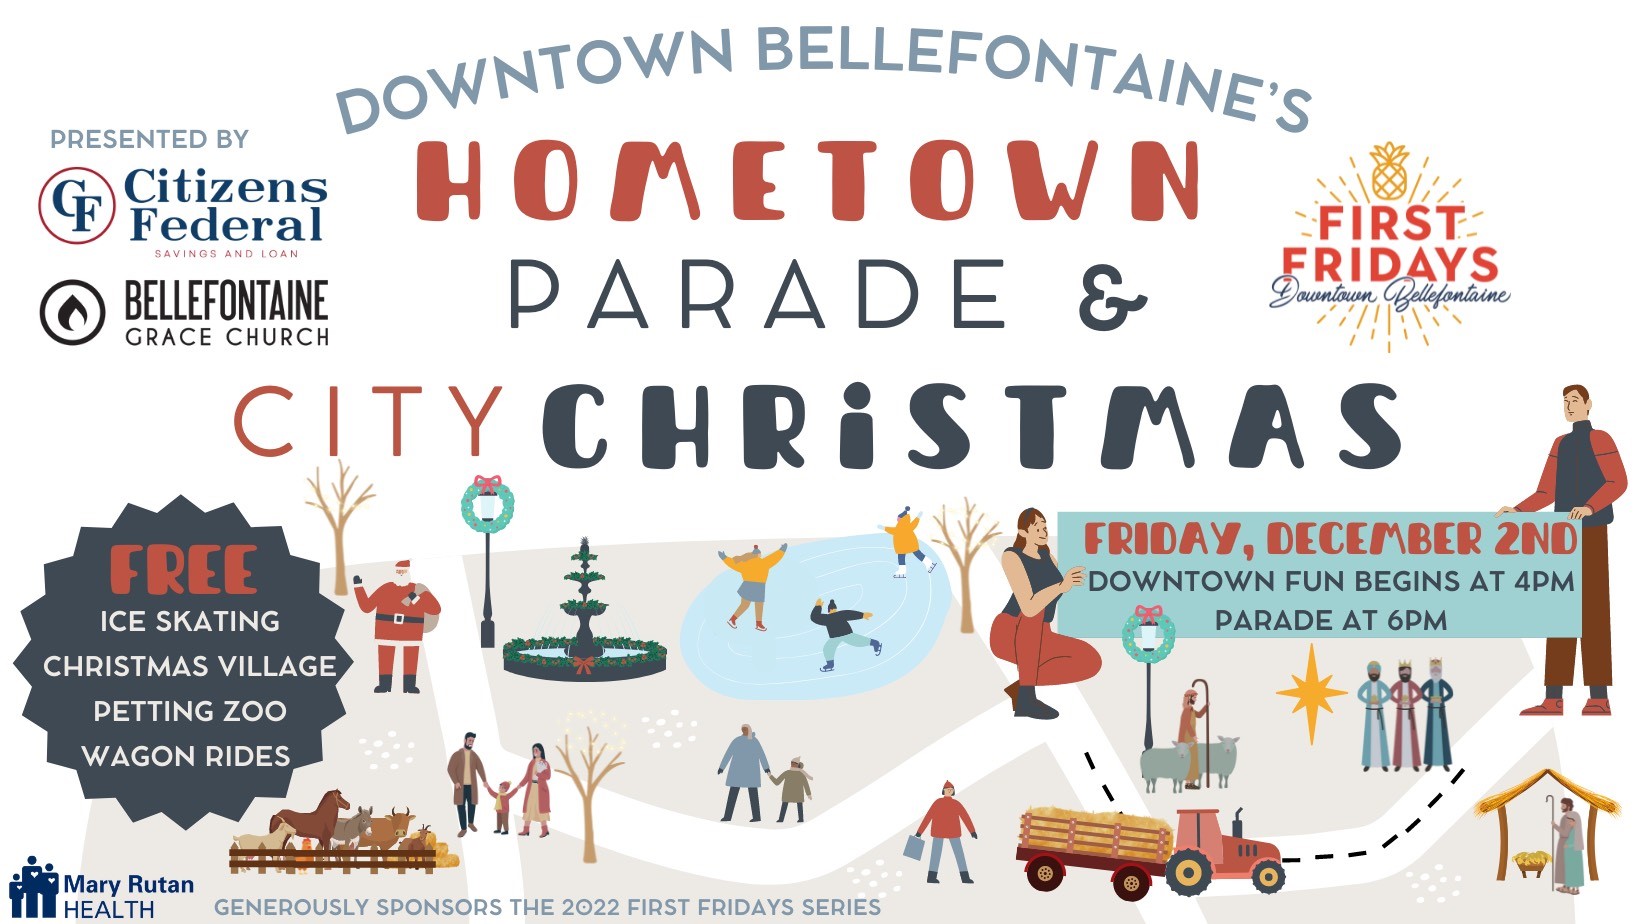 Hometown Parade & City Christmas presented by Citizens Federal & Bellefontaine Grace